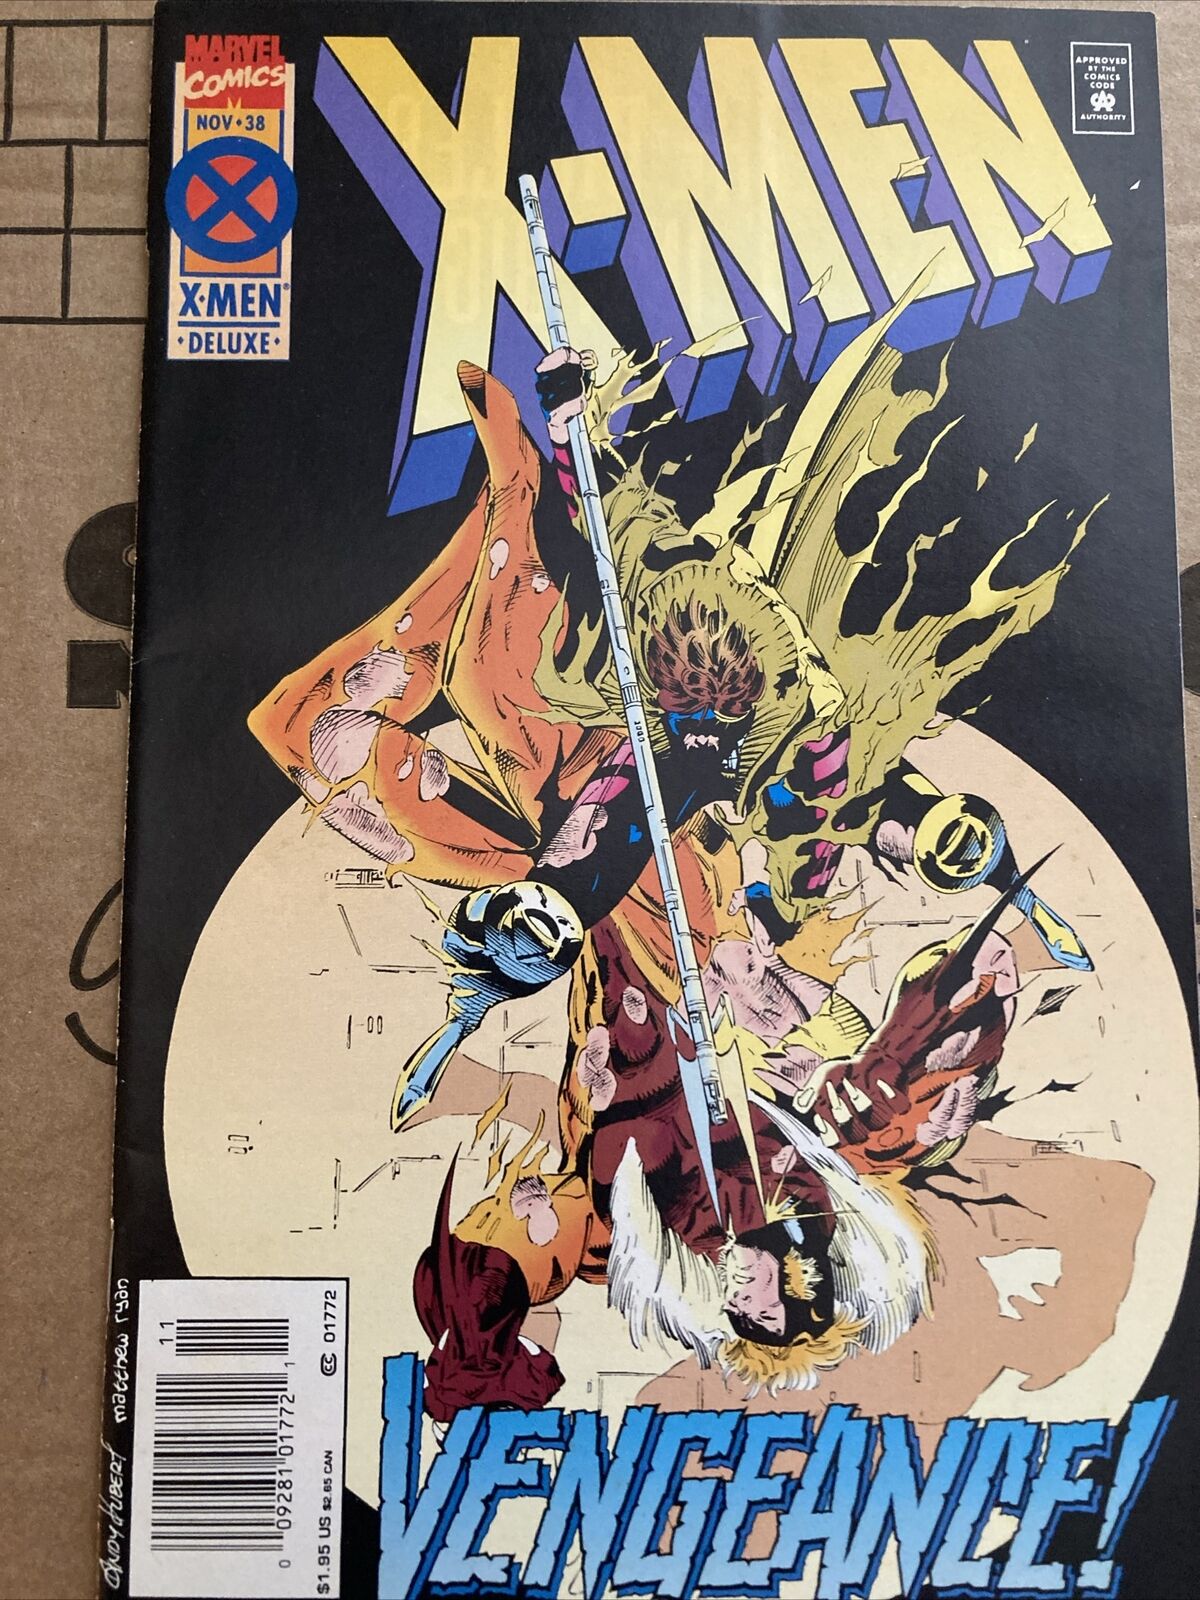 X-MEN #38 (1994) **NEWSSTAND EDITION. Deluxe Edition. Sabretooth Appearance** 